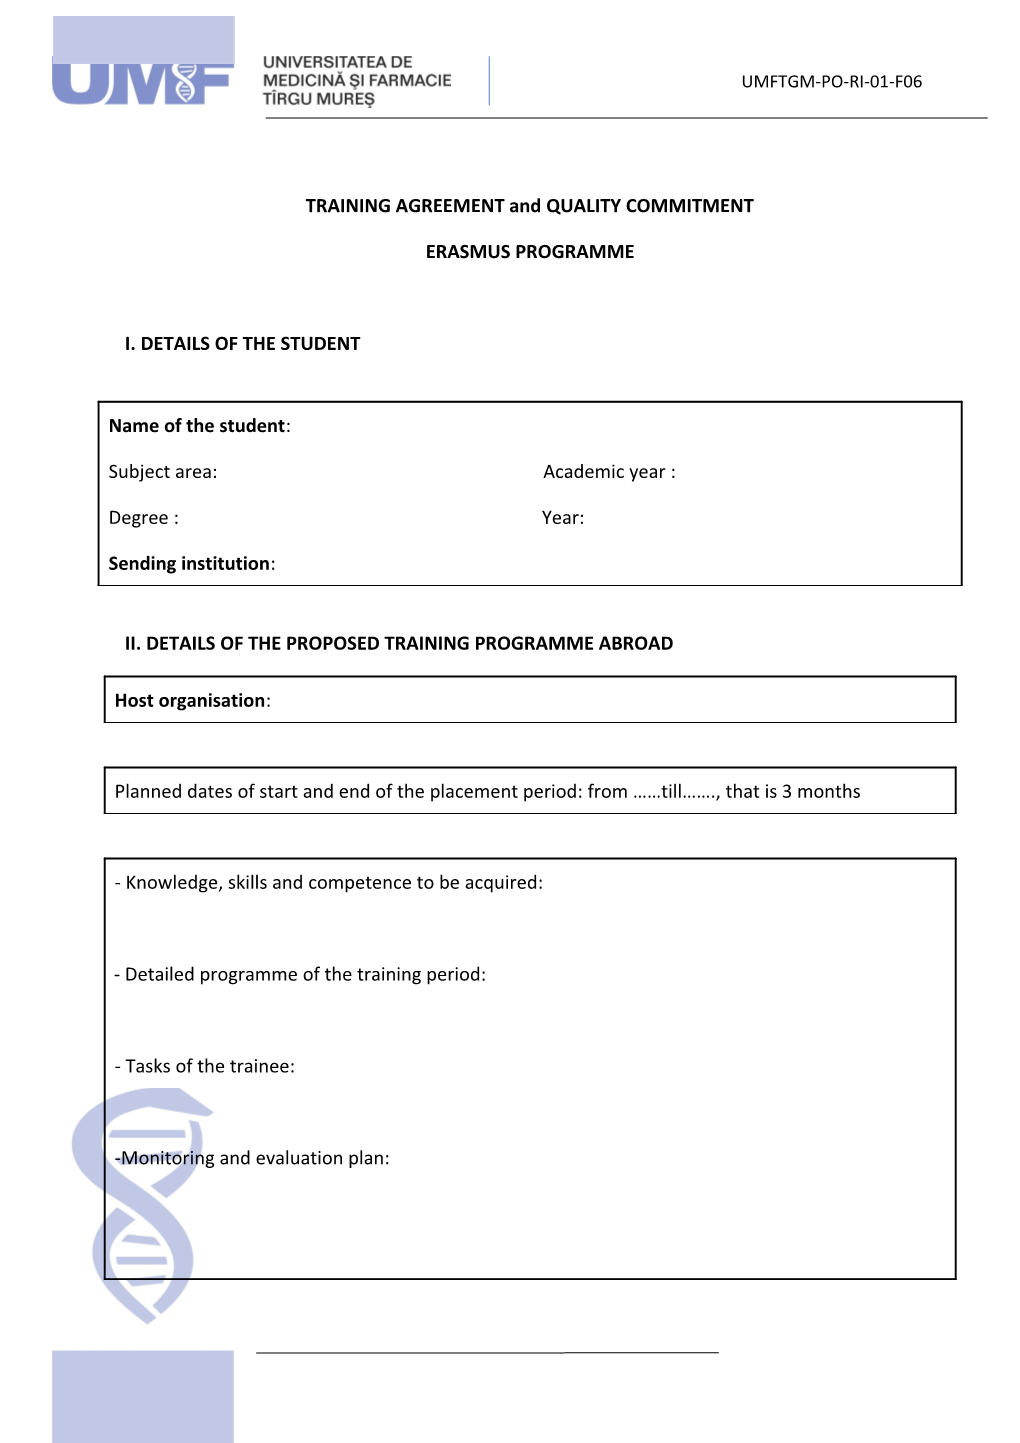 TRAINING AGREEMENT and QUALITY COMMITMENT